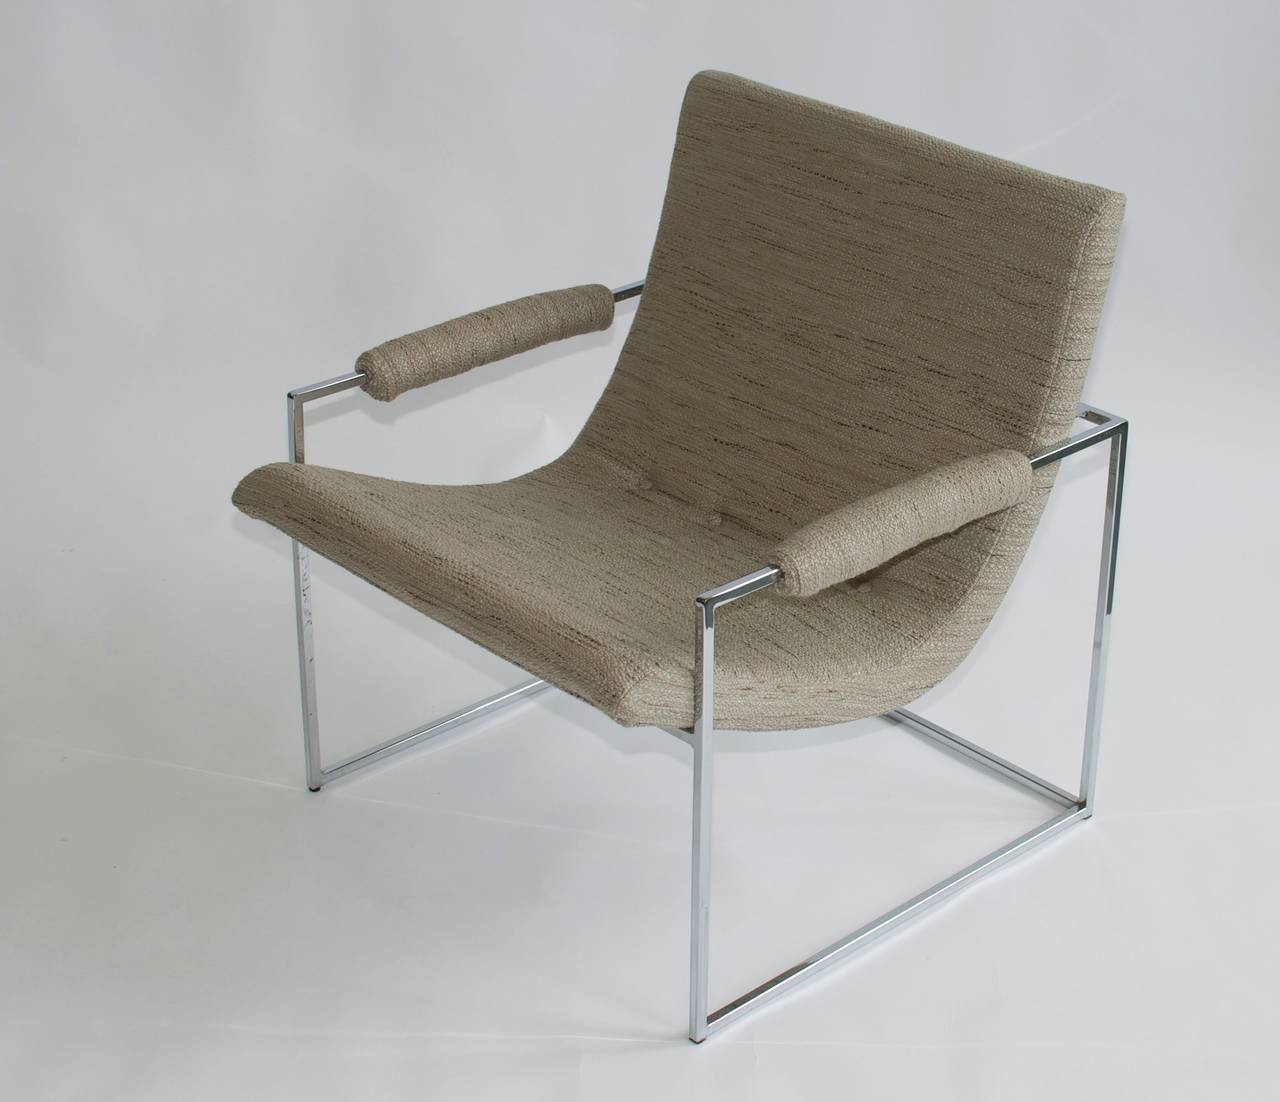 Pair of Petite Milo Baughman chrome lounge chairs. Newly upholstered. Knoll fabric.